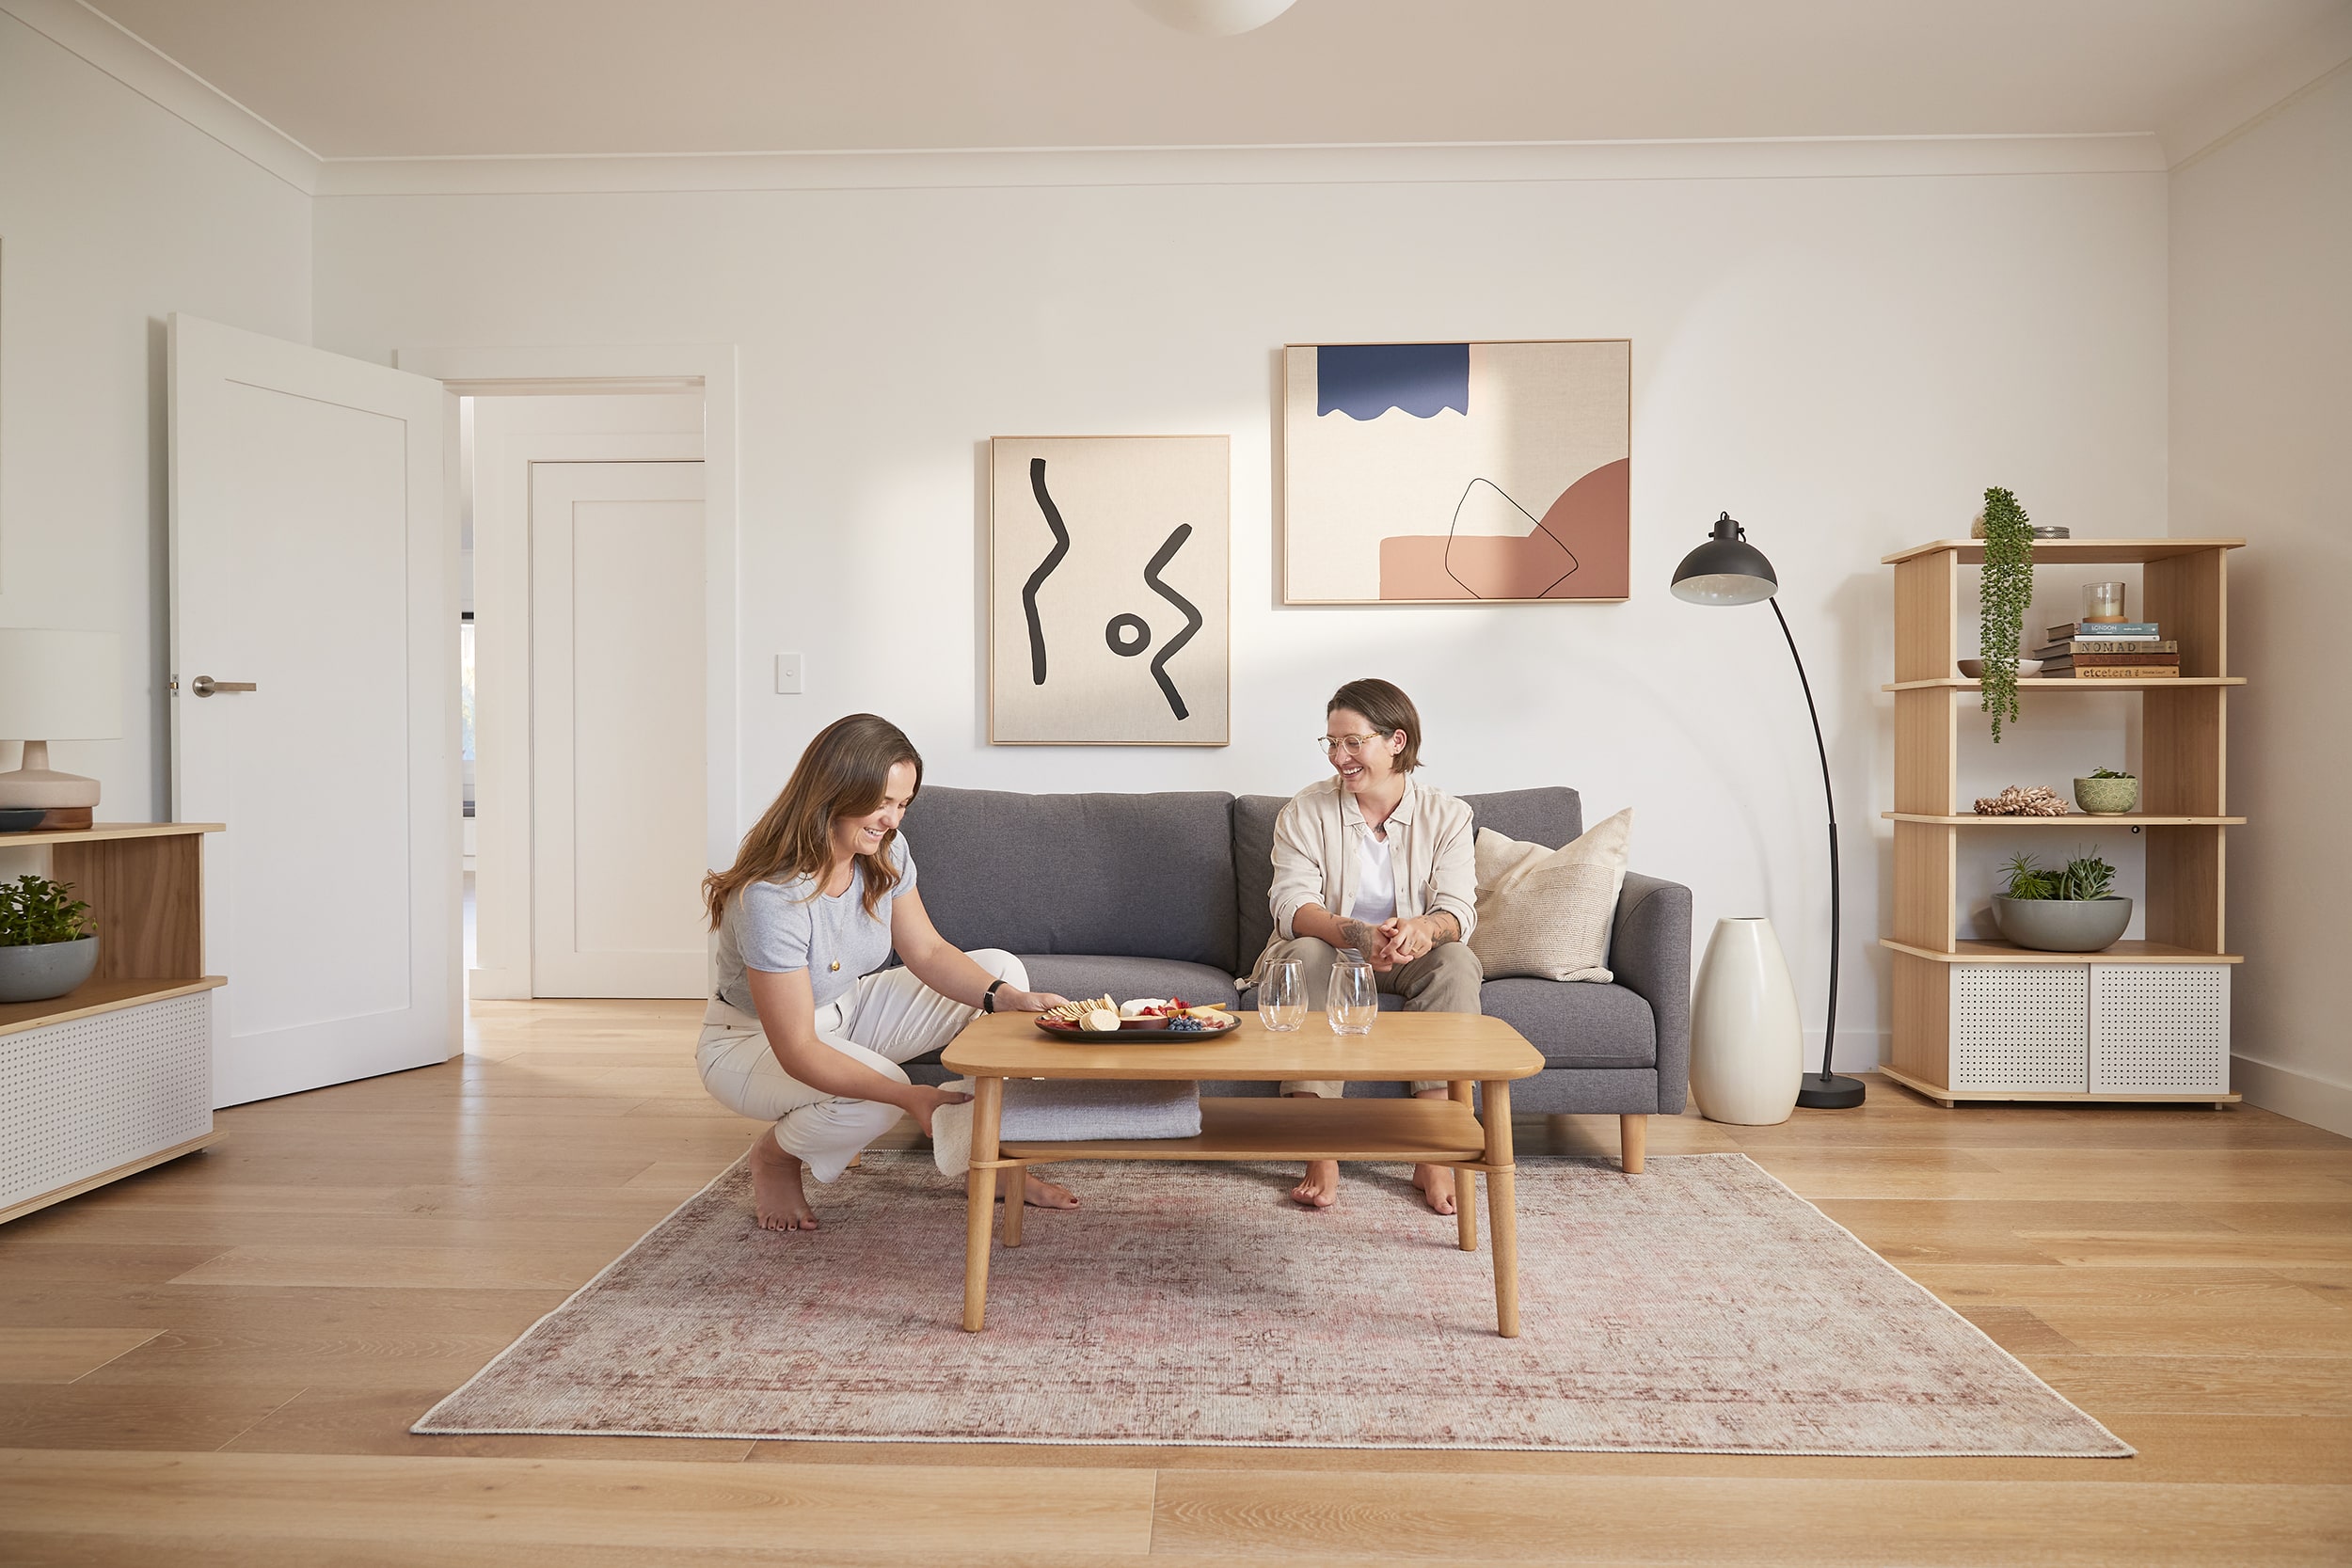 Two women settle down to enjoy a cheese platter from their beautiful Koala wood coffee table